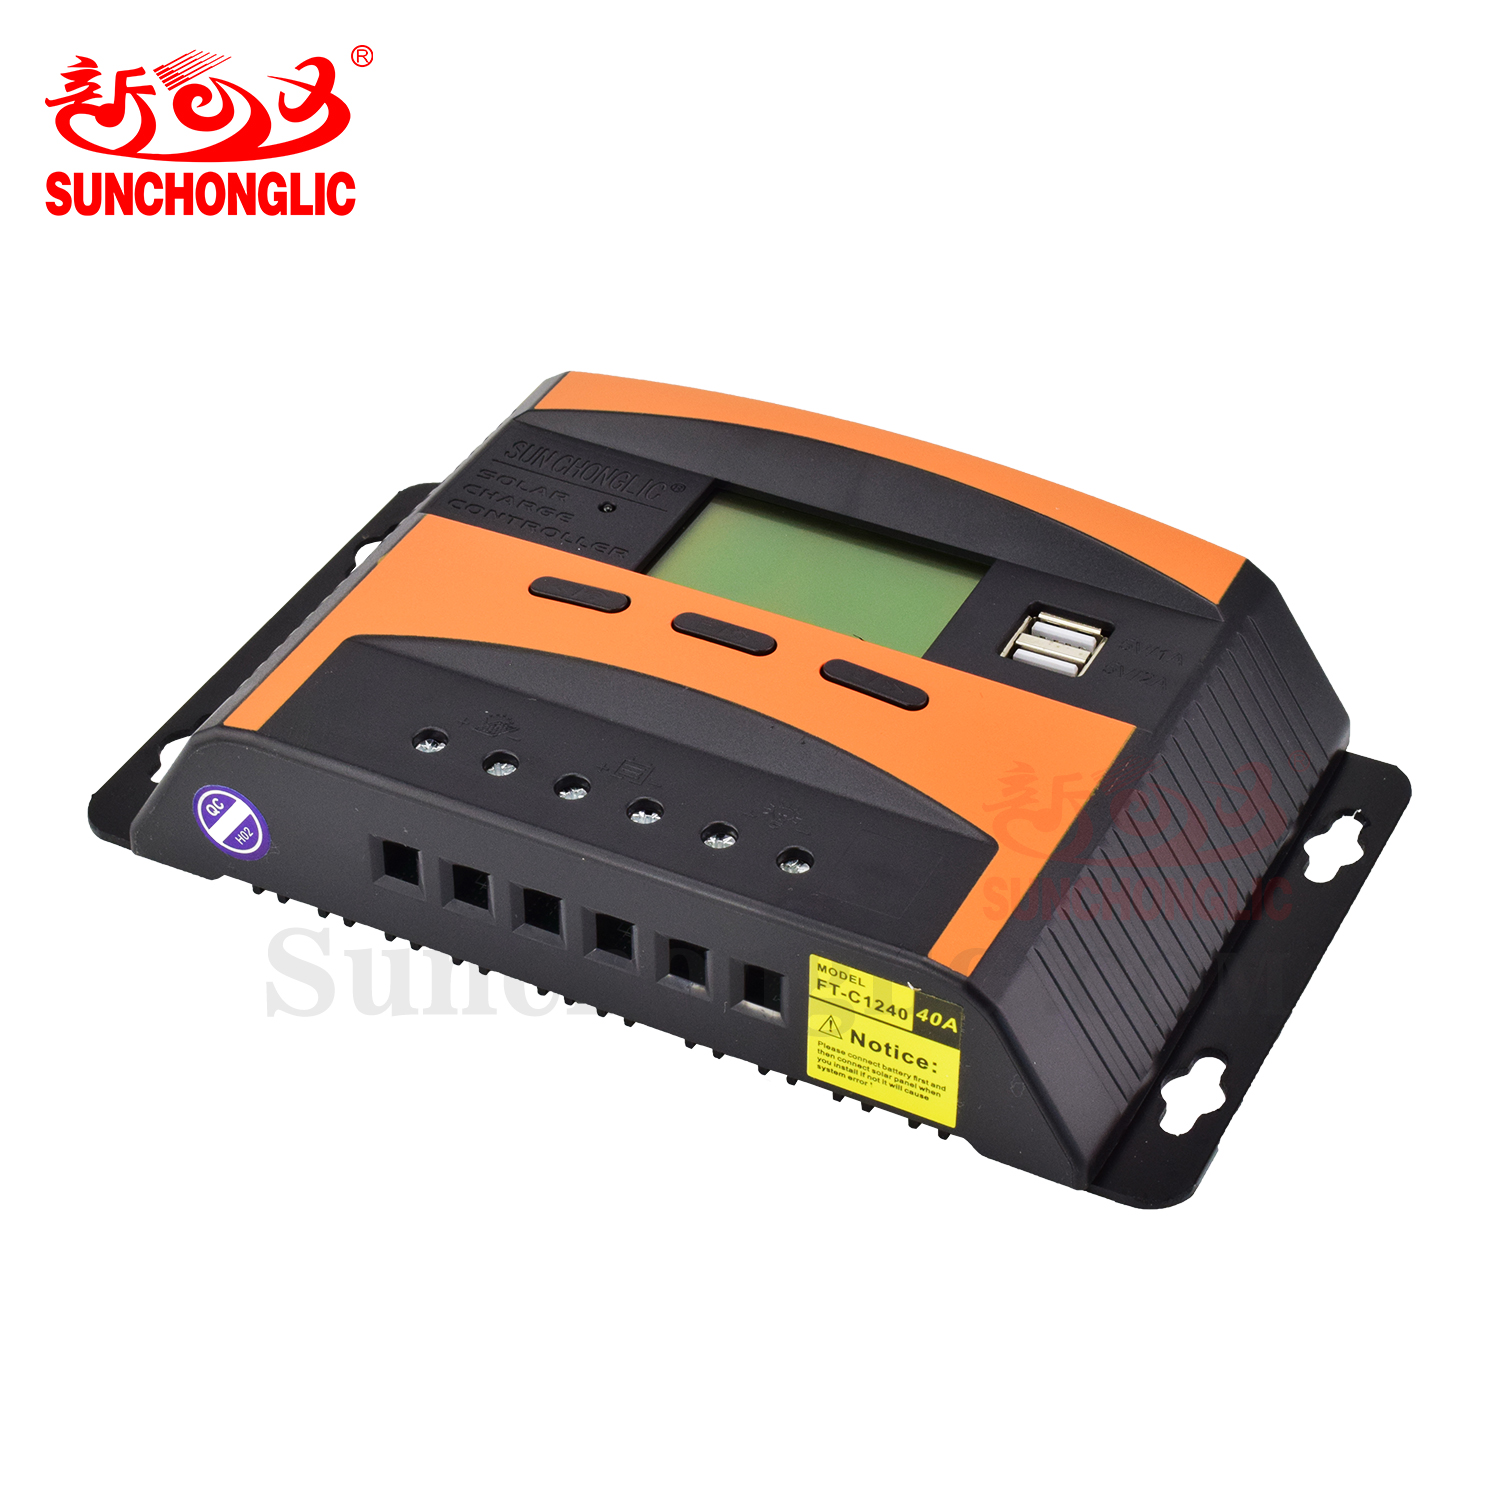 Solar Charge Controller - FT-C1240